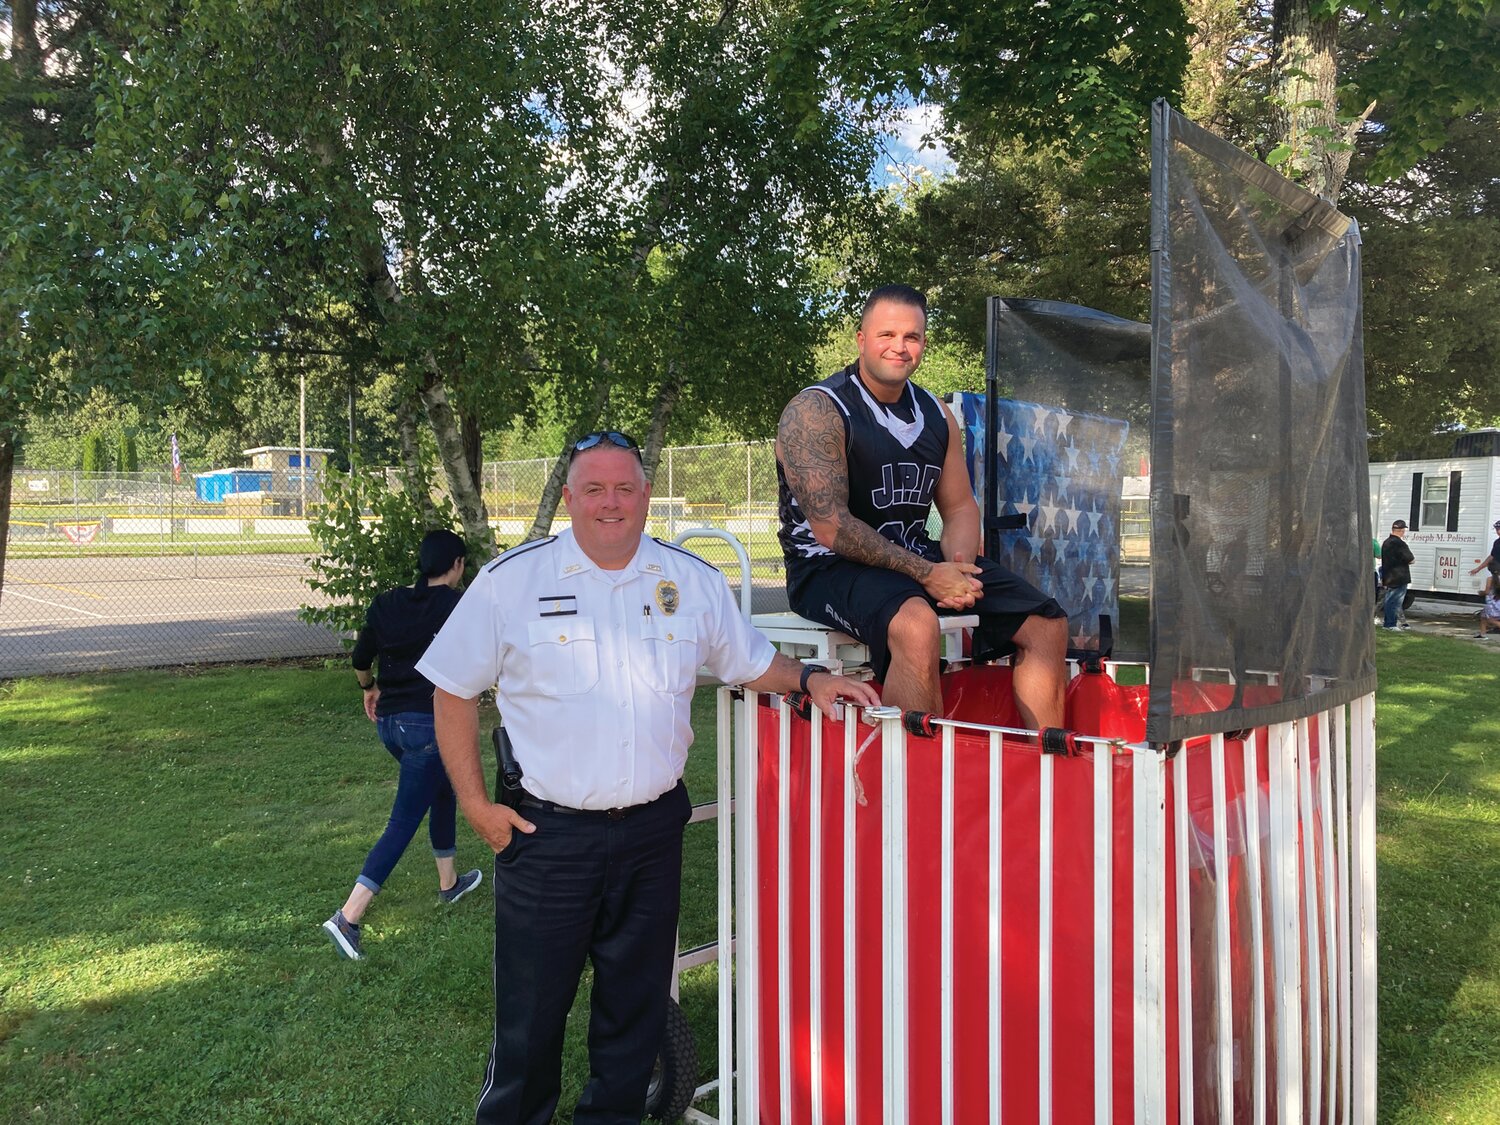 CHILLING OUT: Deputy Chief Matthew LeDuc ensured the water level in the dunk tank was high enough to cover Officer Louis Cotoia.